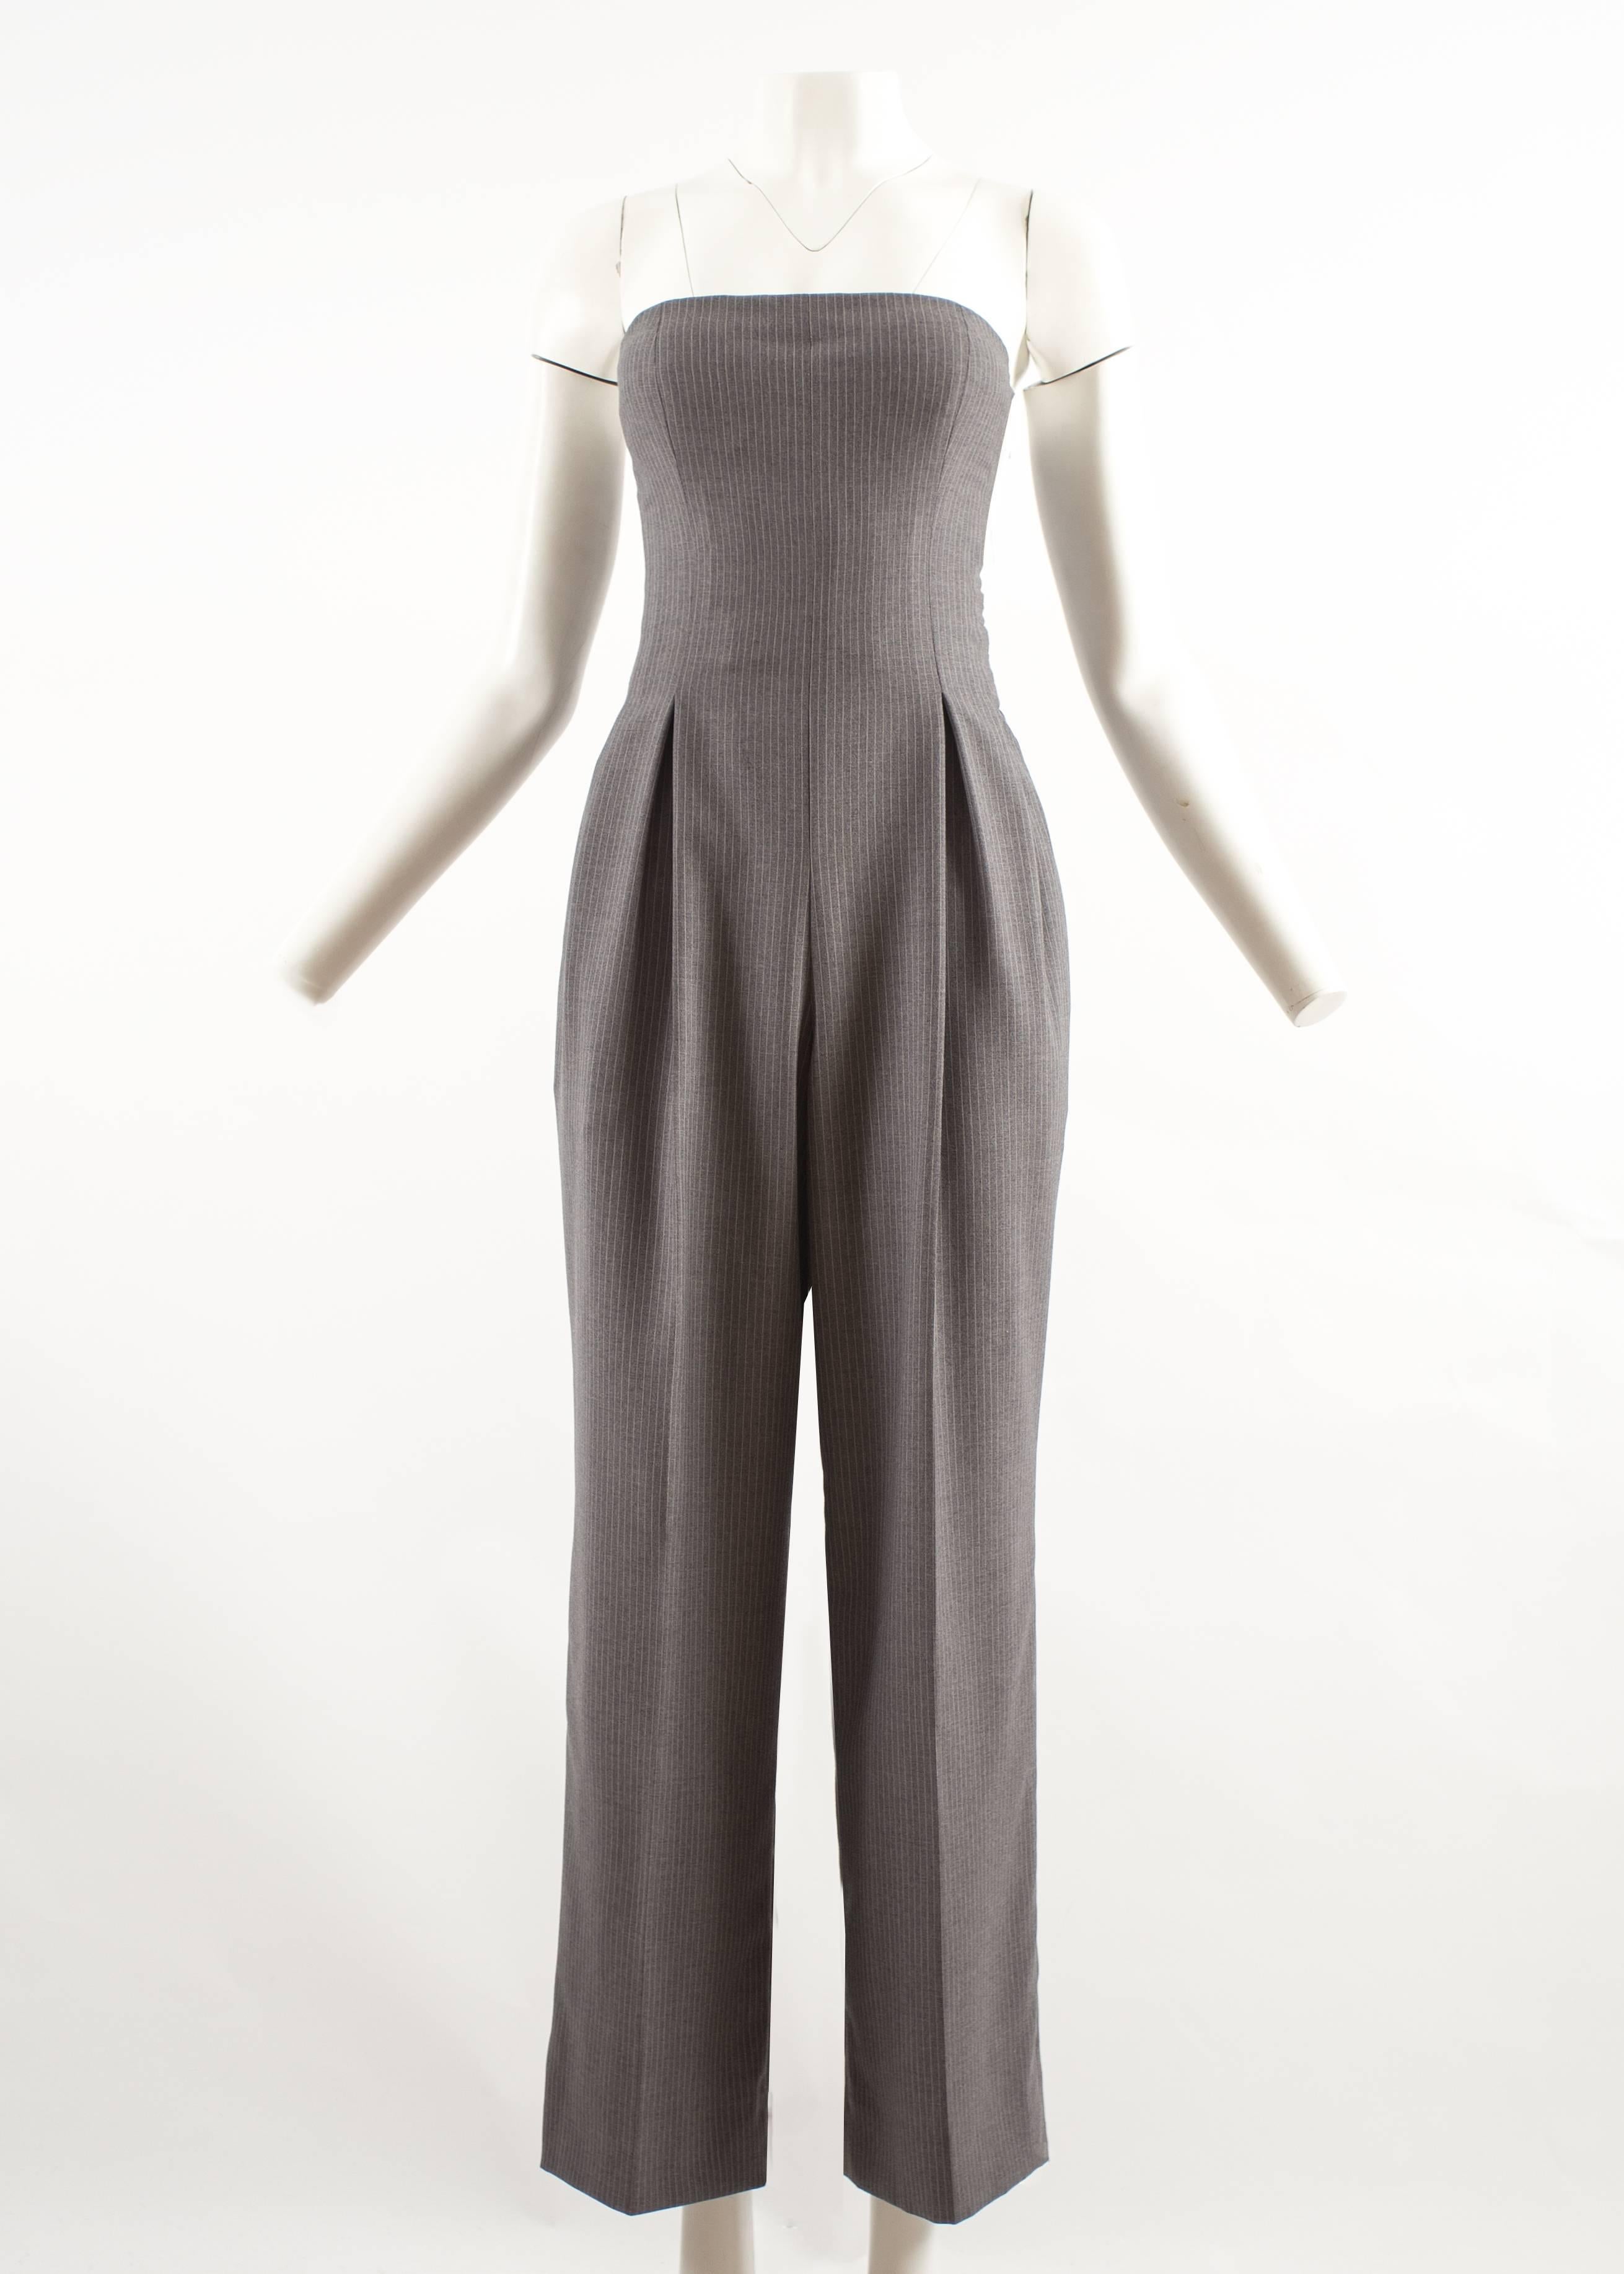 John Galliano for Givenchy Autumn-Winter 1996 grey pinstripe strapless jumpsuit 

- two hidden side pockets
- internal wired bra
- invisible zip fastening on side seam
- wide leg pants